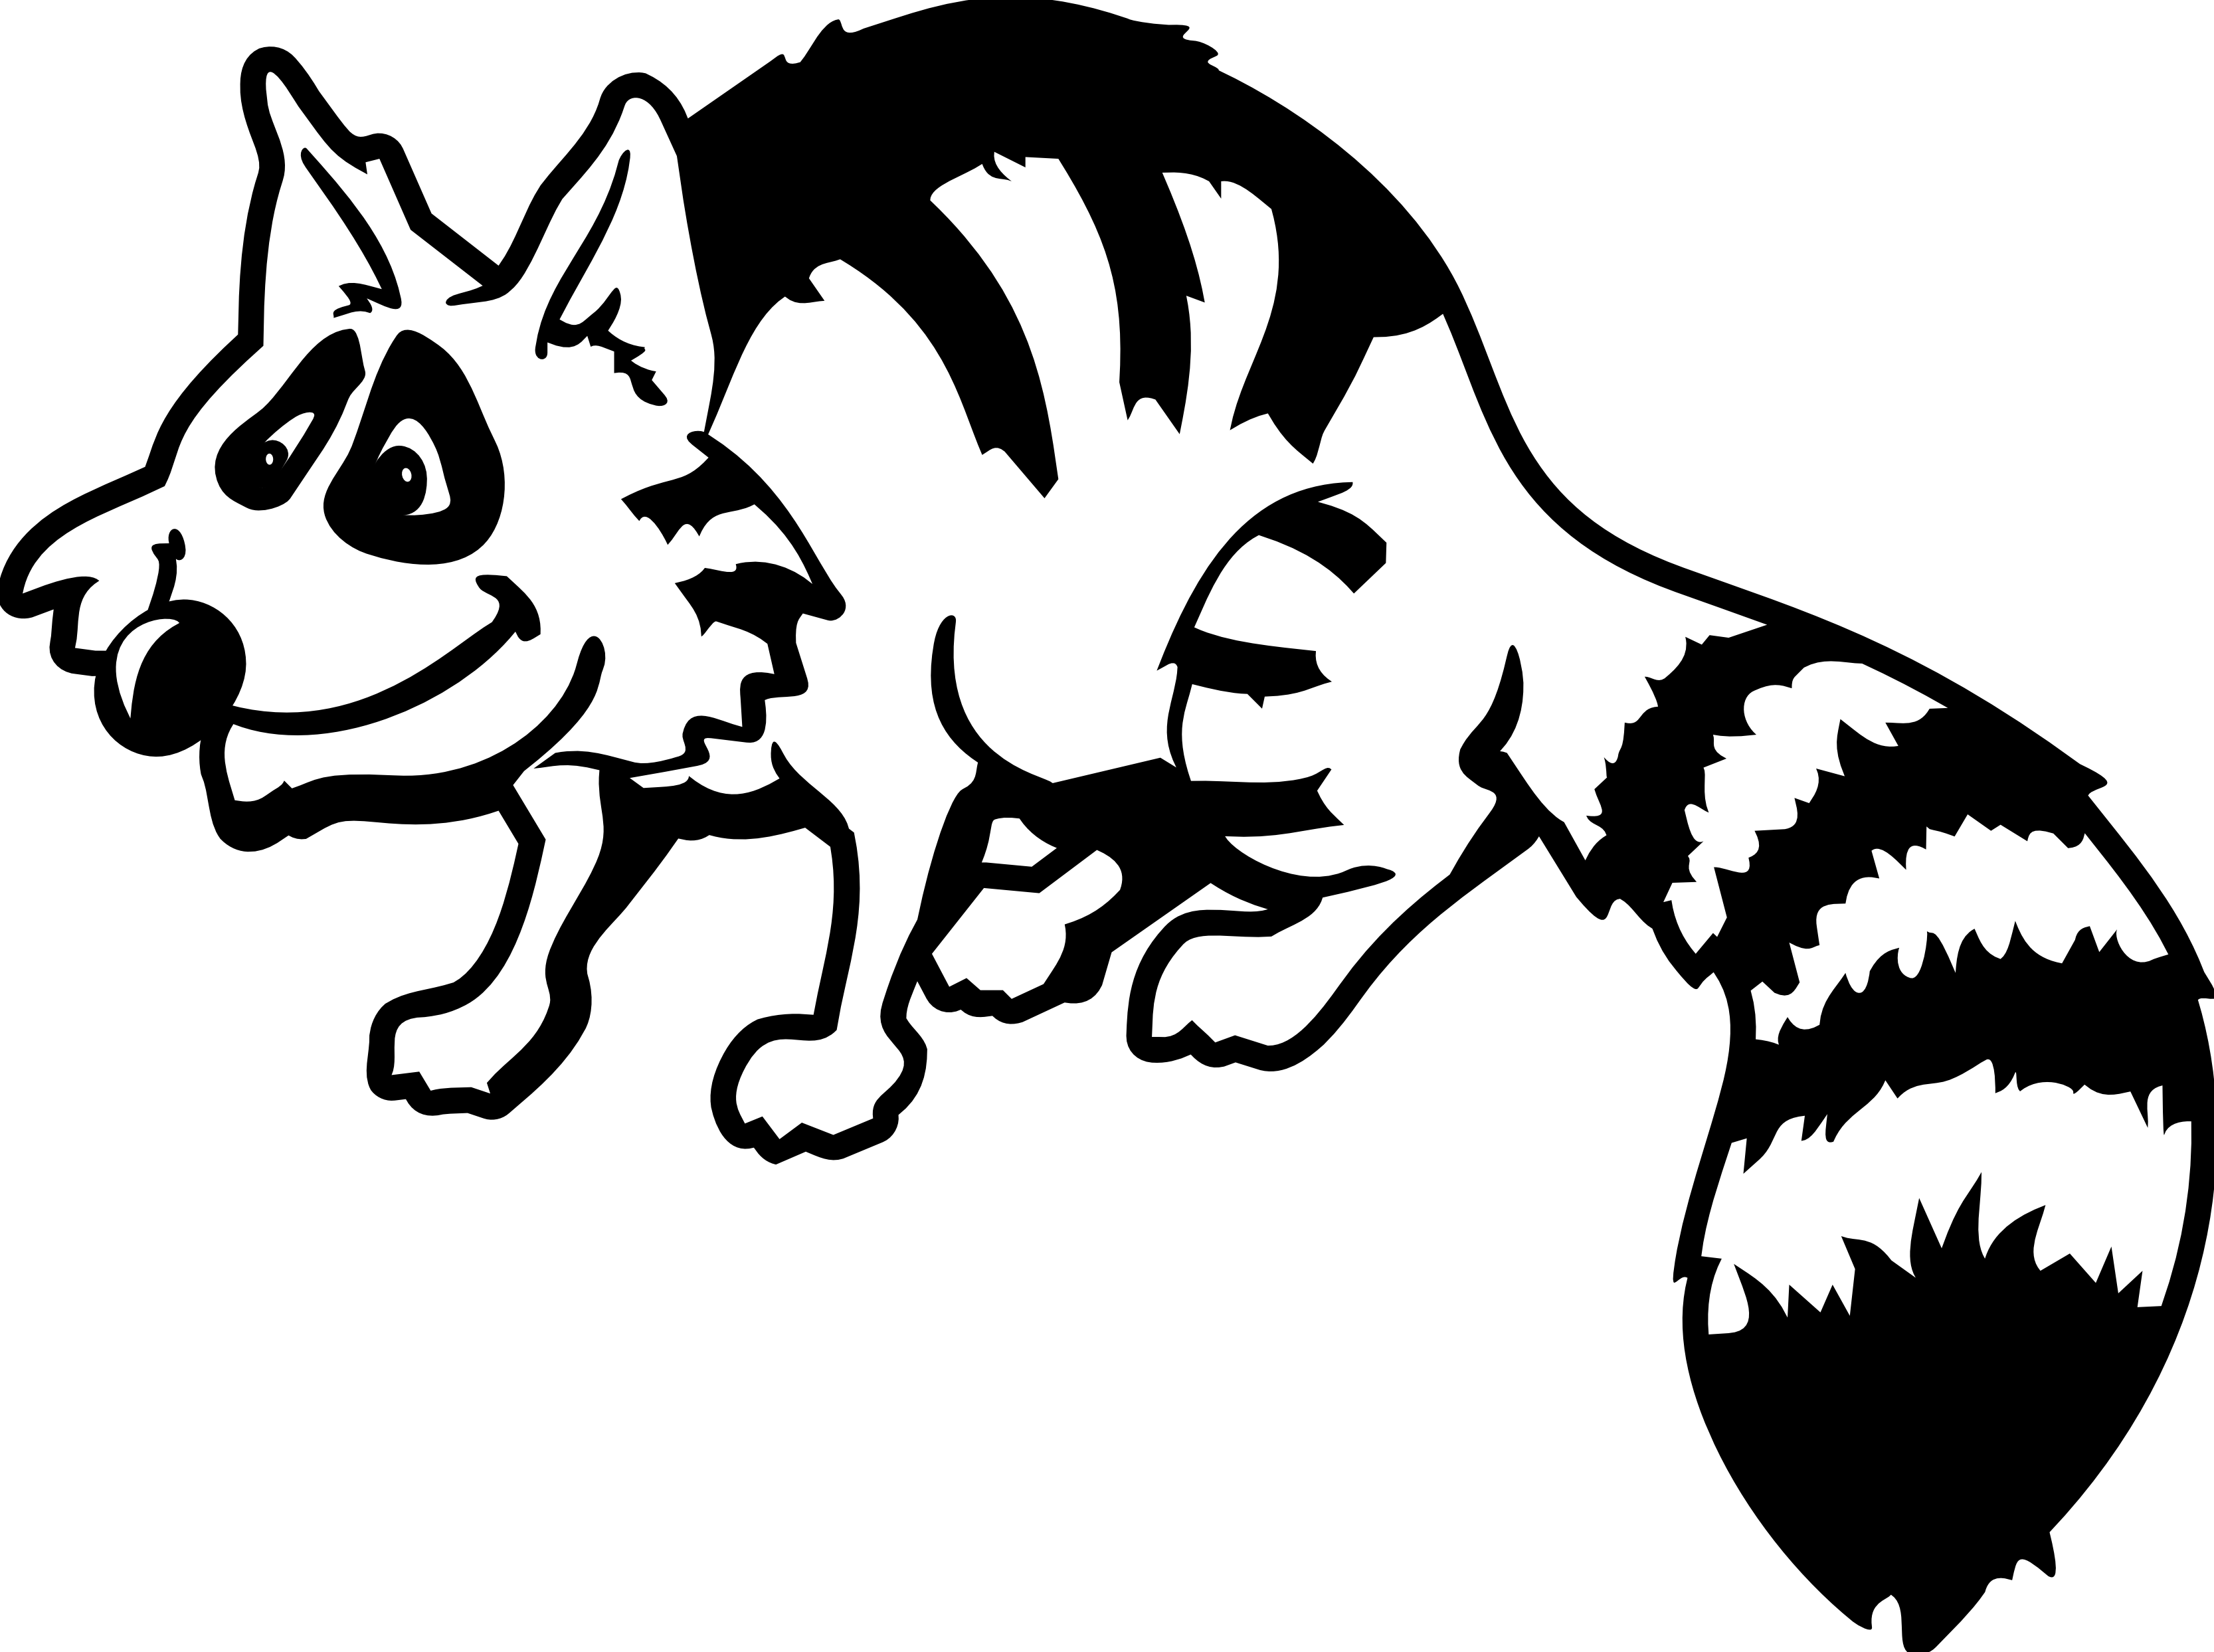 Raccoon clipart black and white free images